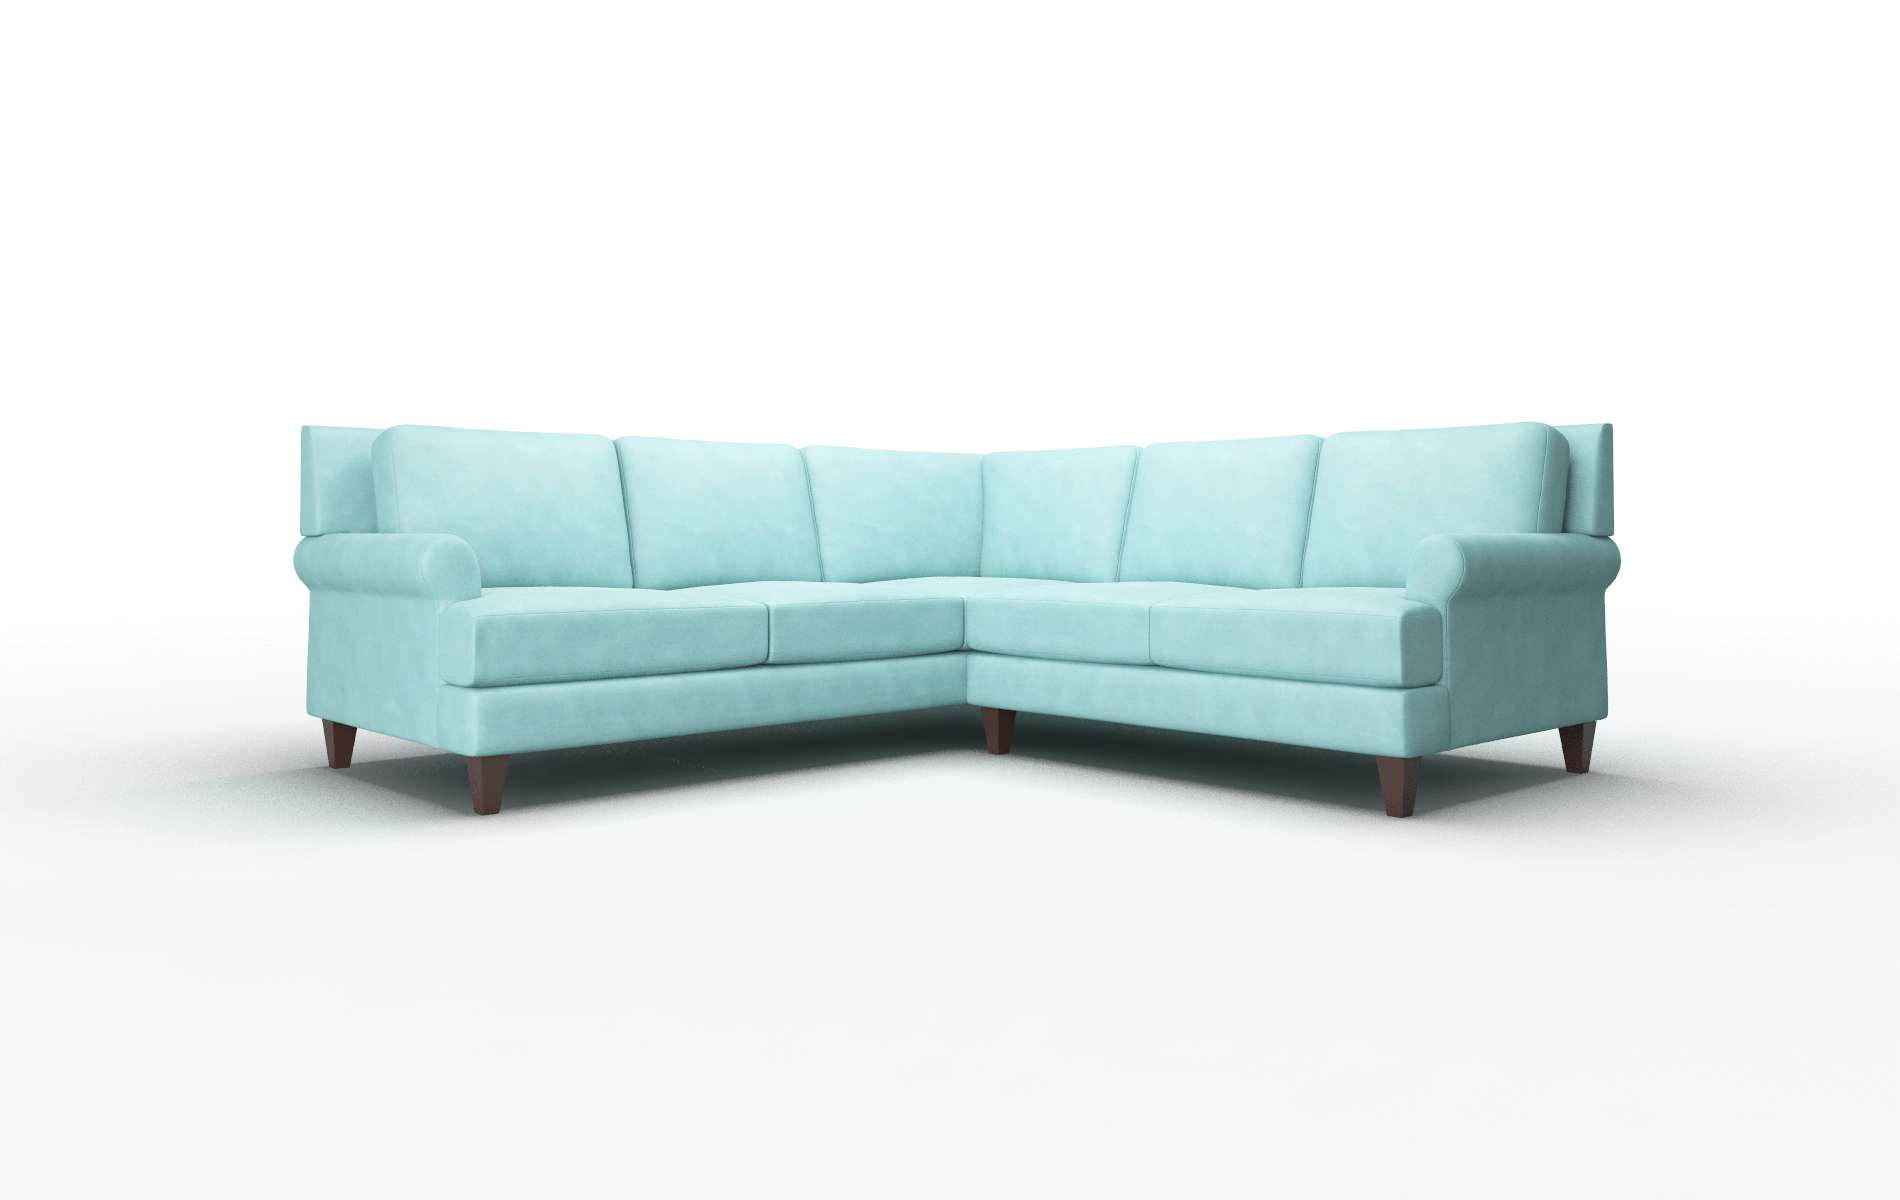 Stockholm Curious Turquoise Sectional espresso legs 1